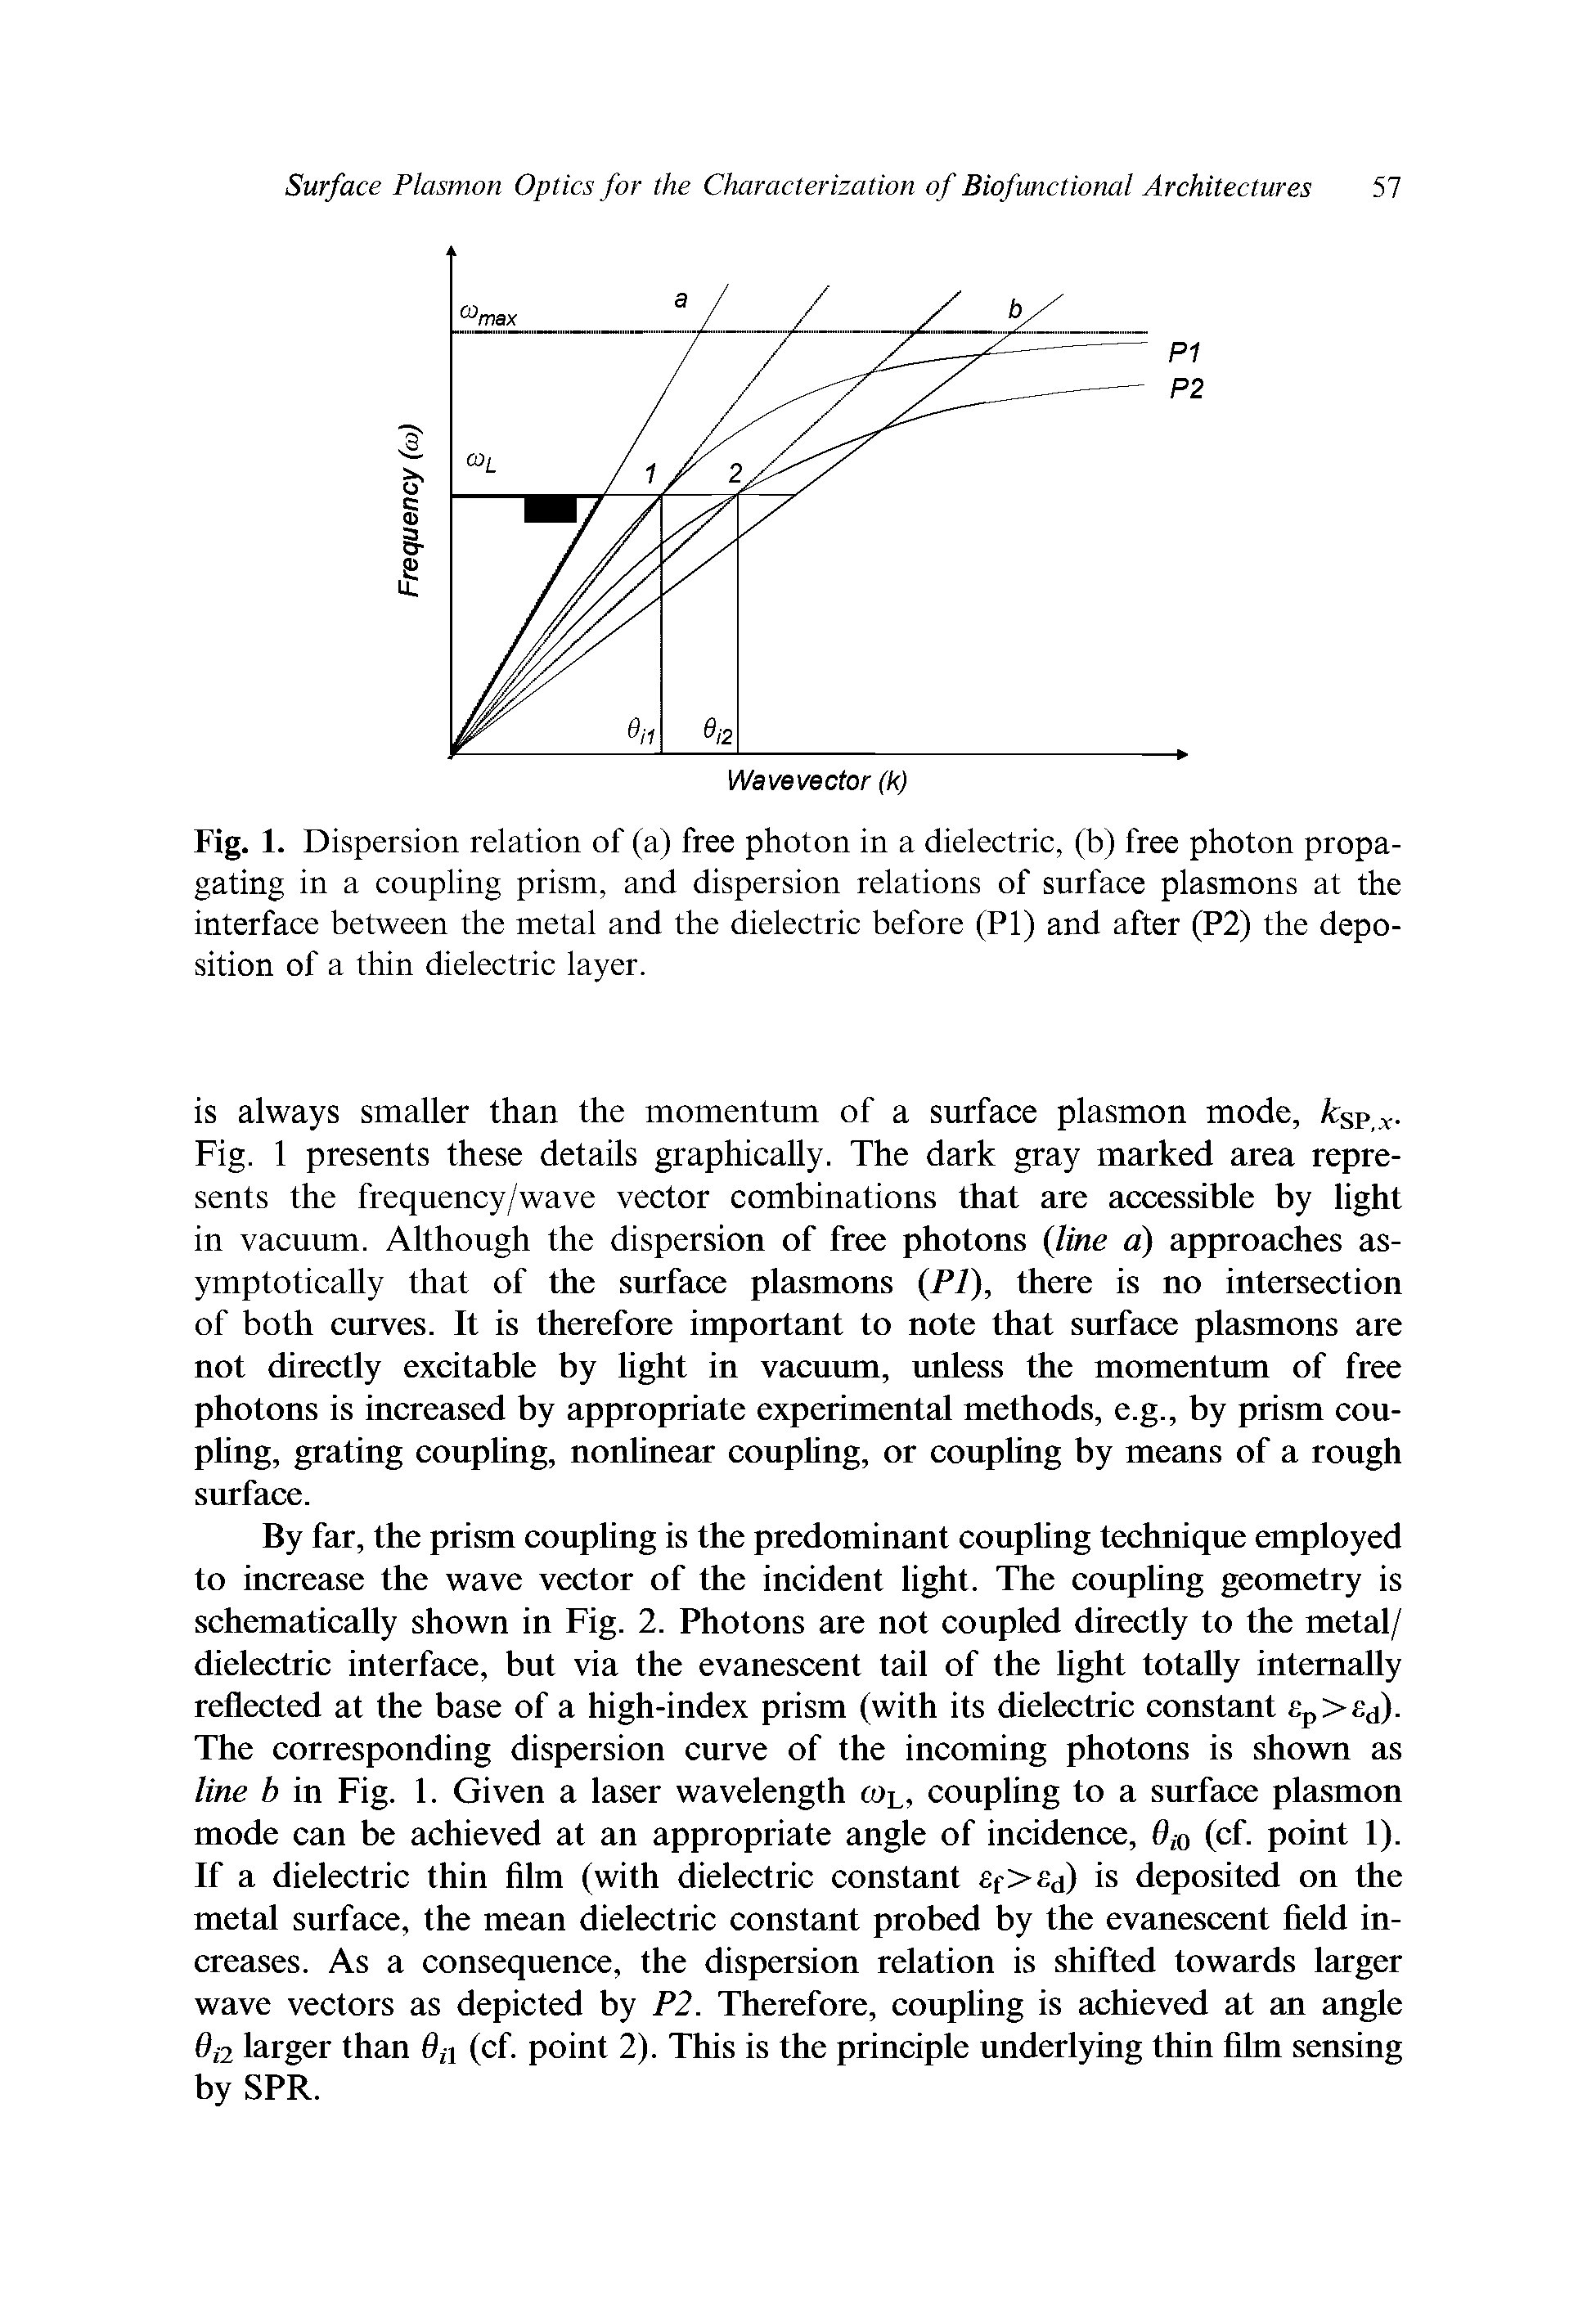 Fig. 1. Dispersion relation of (a) free photon in a dielectric, (b) free photon propagating in a coupling prism, and dispersion relations of surface plasmons at the interface between the metal and the dielectric before (PI) and after (P2) the deposition of a thin dielectric layer.